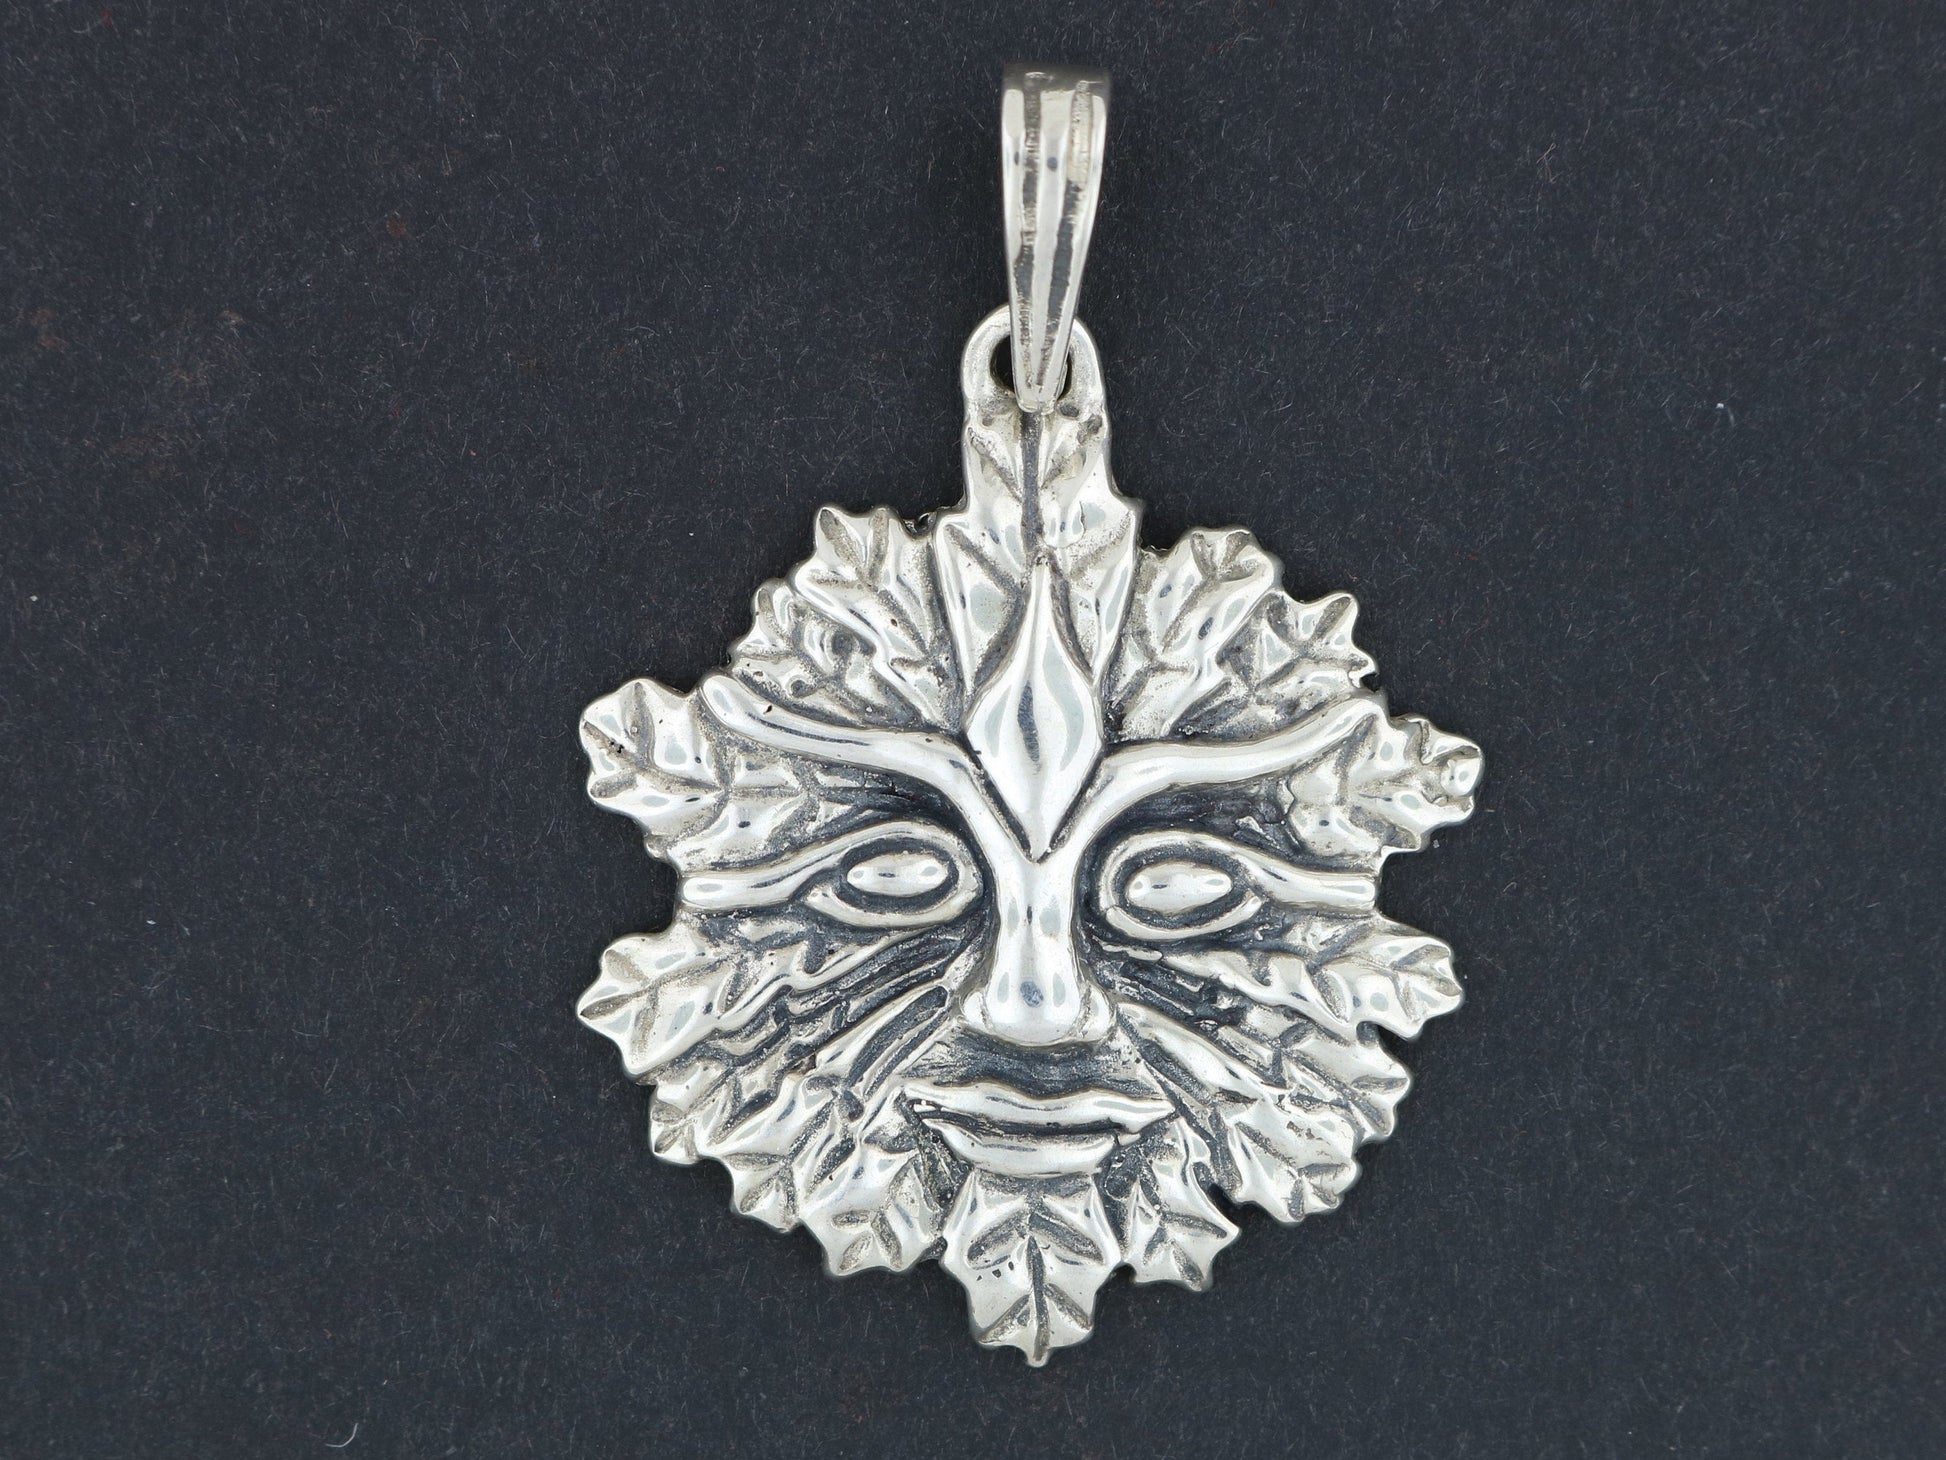 Green Man Pendant in Sterling Silver or Antique Bronze, Silver Pagan Jewelry, Silver Pagan Jewellery, Bronze Pagan Jewelry, Bronze Pagan Jewellery, Green Man Pendant, Silver Pagan Pendant, Bronze Pagan Pendant, Silver Wiccan Jewelry, Silver Wiccan Jewellery, Bronze Wiccan Jewelry, Bronze Wiccan Jewellery, Sterling Silver Witch Pendant, Antique Bronze Witch Pendant, Silver Greenman Pendant, Bronze Greenman Pendant, Silver Green Man Pendant, Bronze Green Man Pendant, Celtic Pagan Pendant